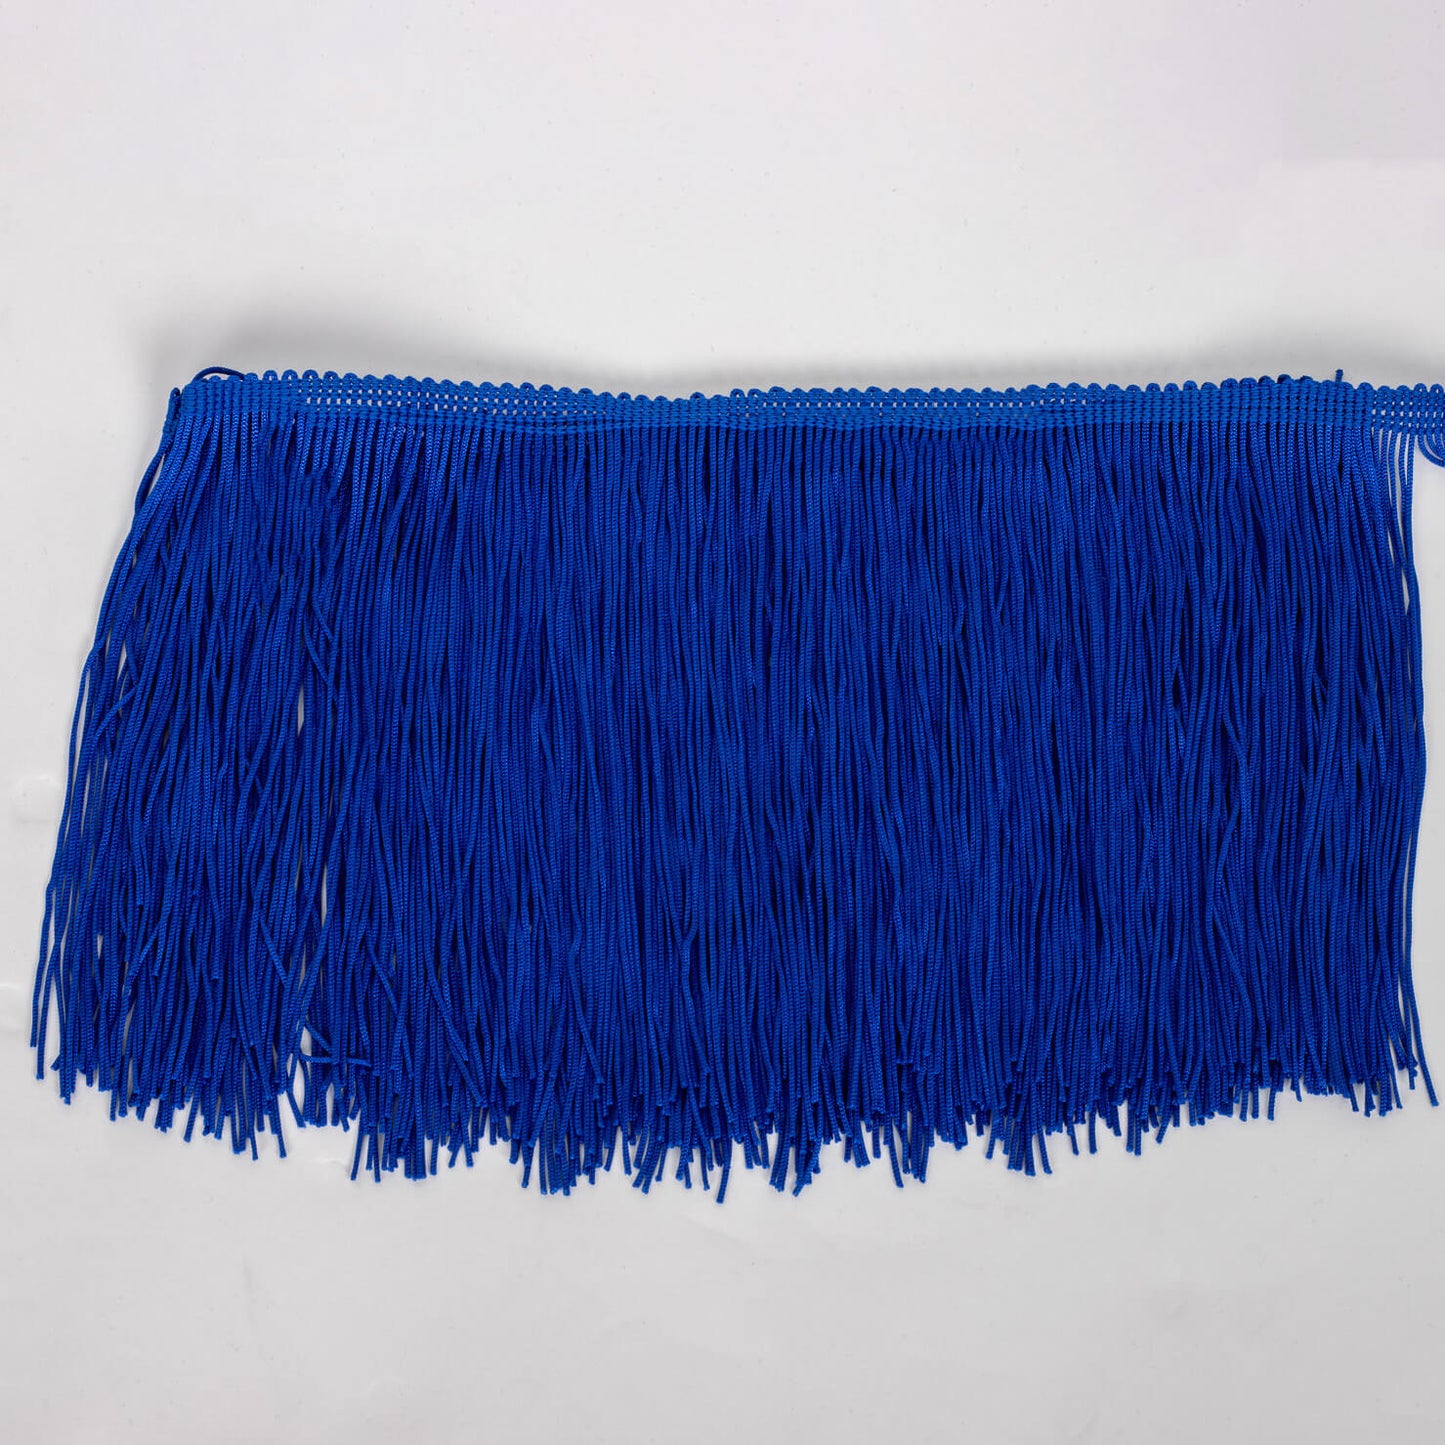 blue fringe for sewing on to clothes and costumes